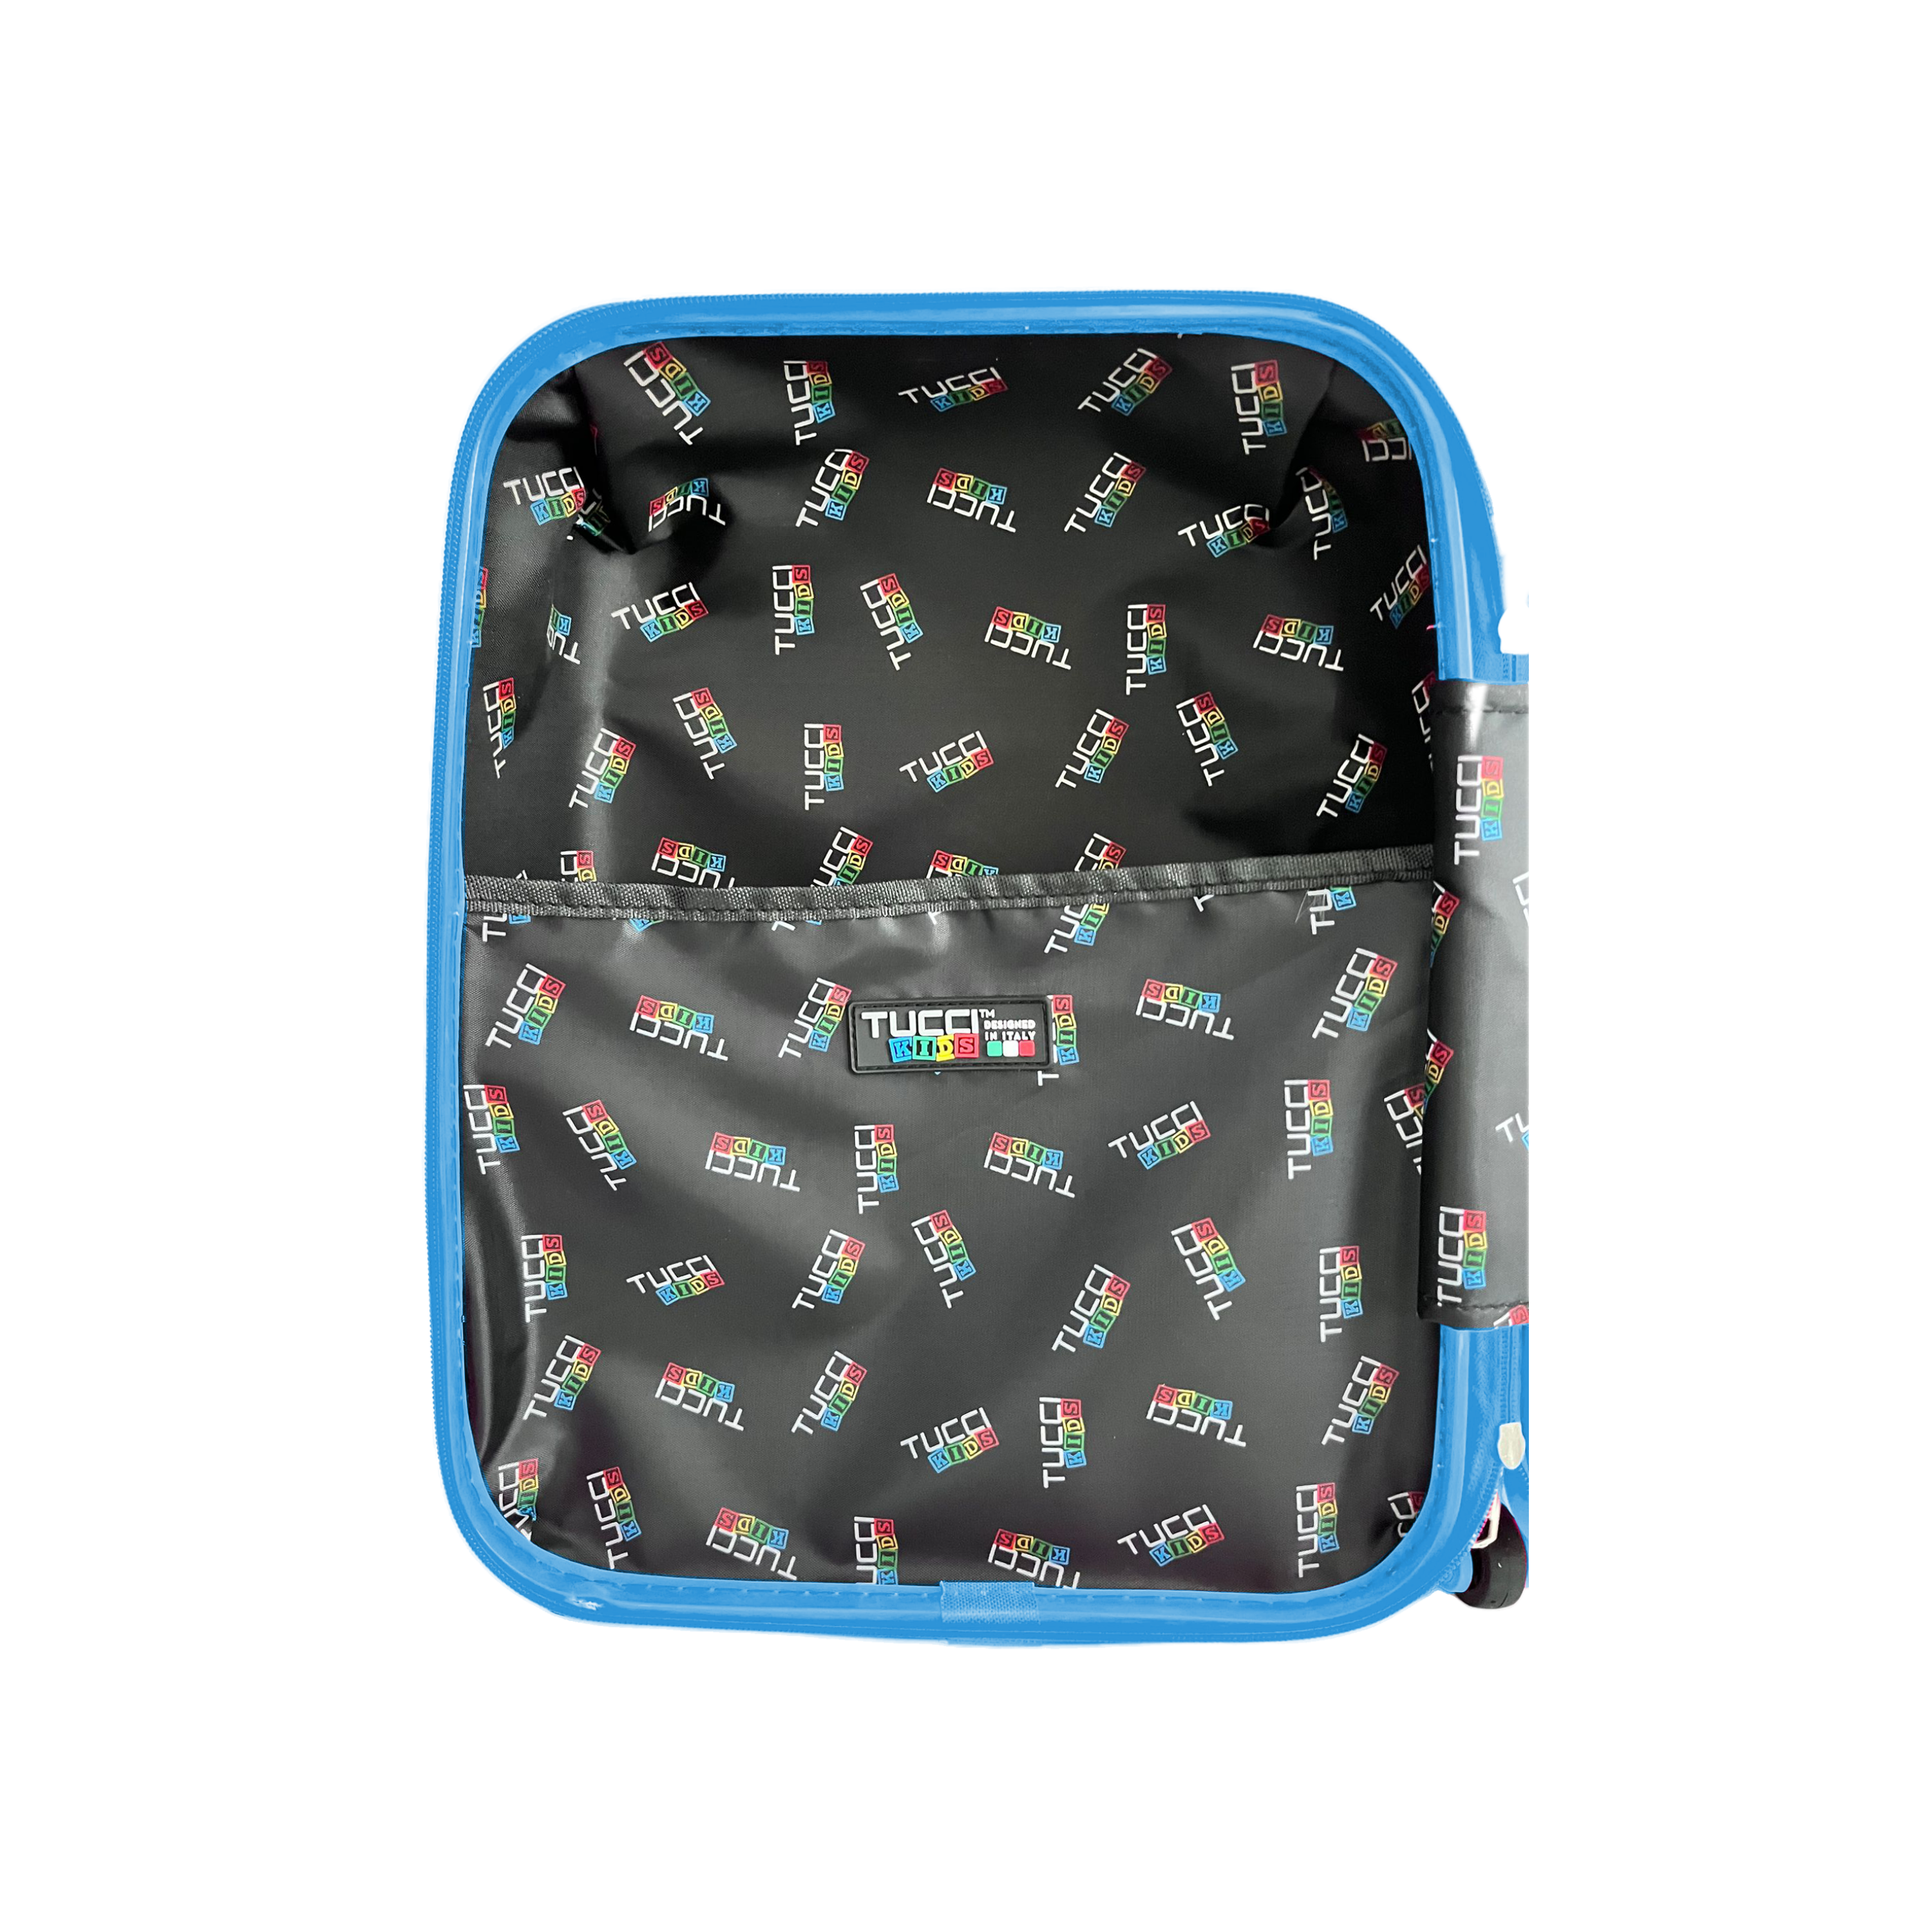 TUCCI CHIRPY DOLPHIN 18" Travel Kids Luggage